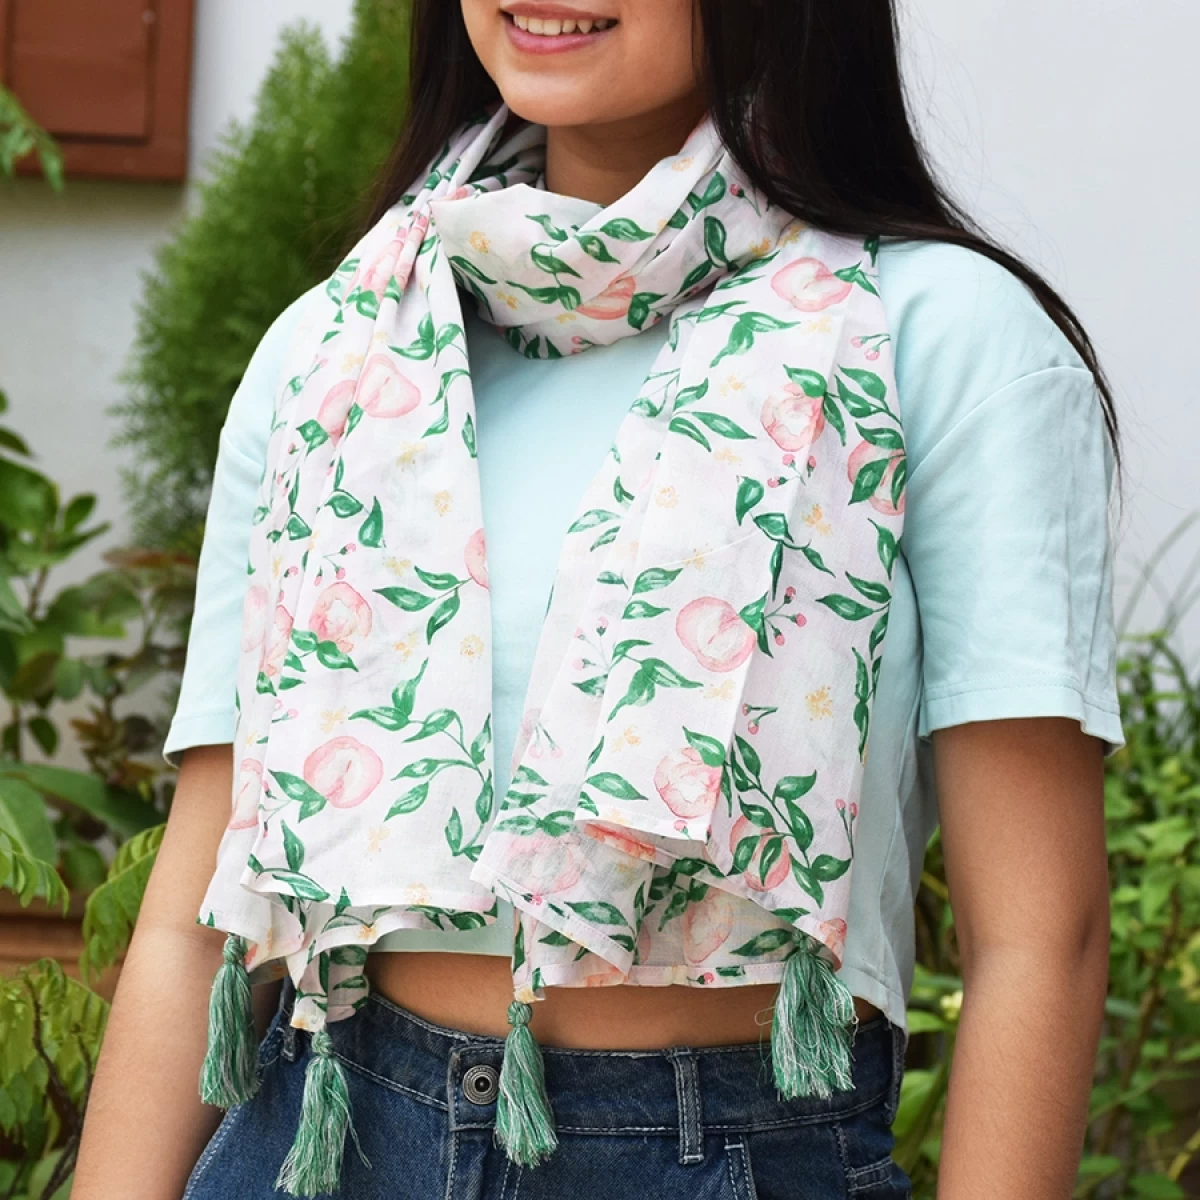 Peach Fruit Printed Scarf- Scarf For Women- Cotton Scarf- Scarf For Summer